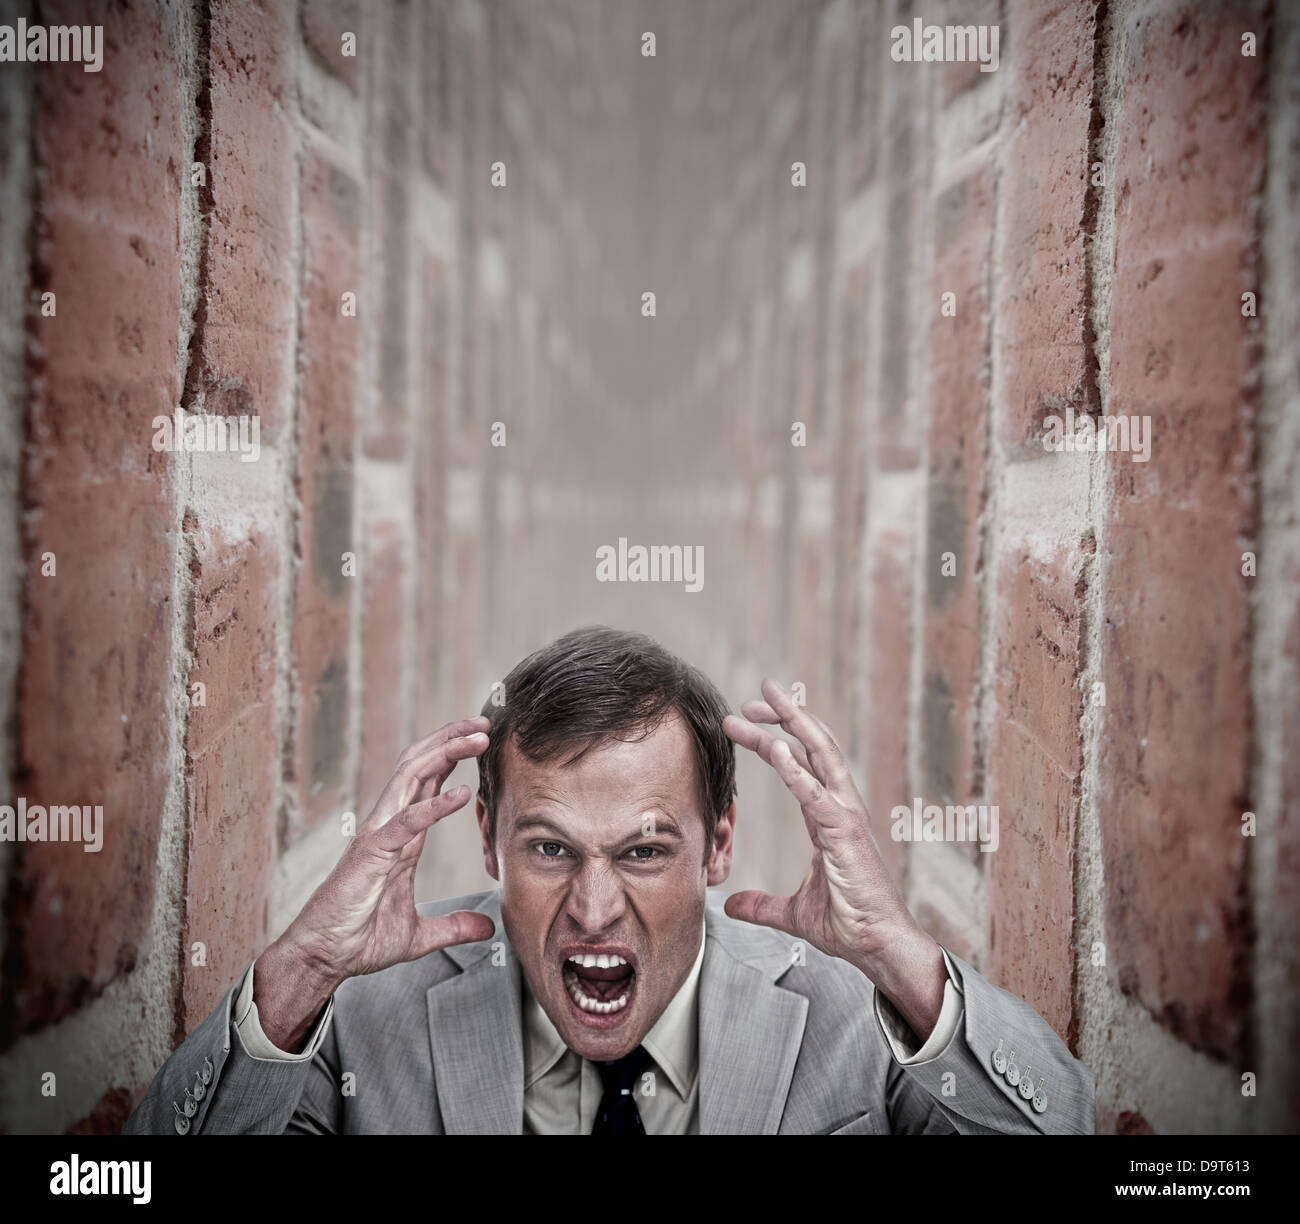 Angry businessman in a dead end Banque D'Images